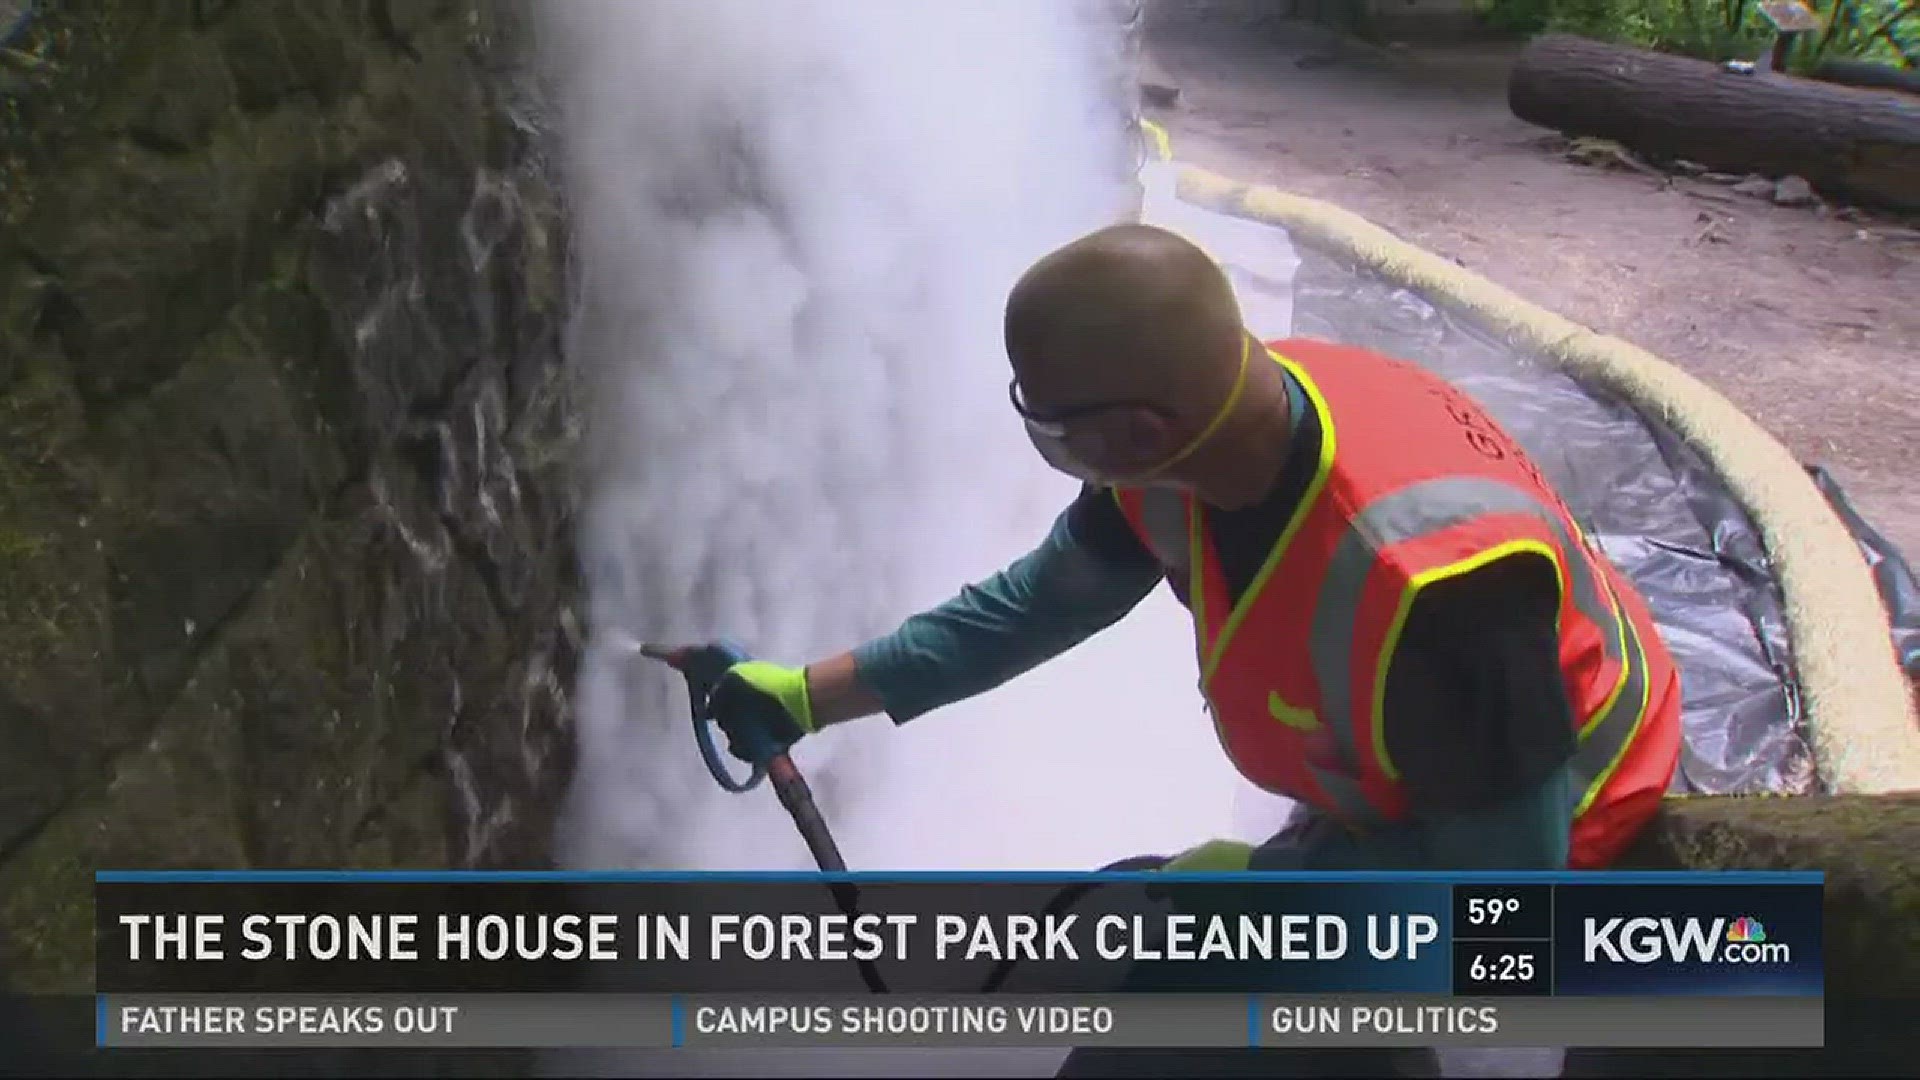 The Stone House in Forest Park cleaned up